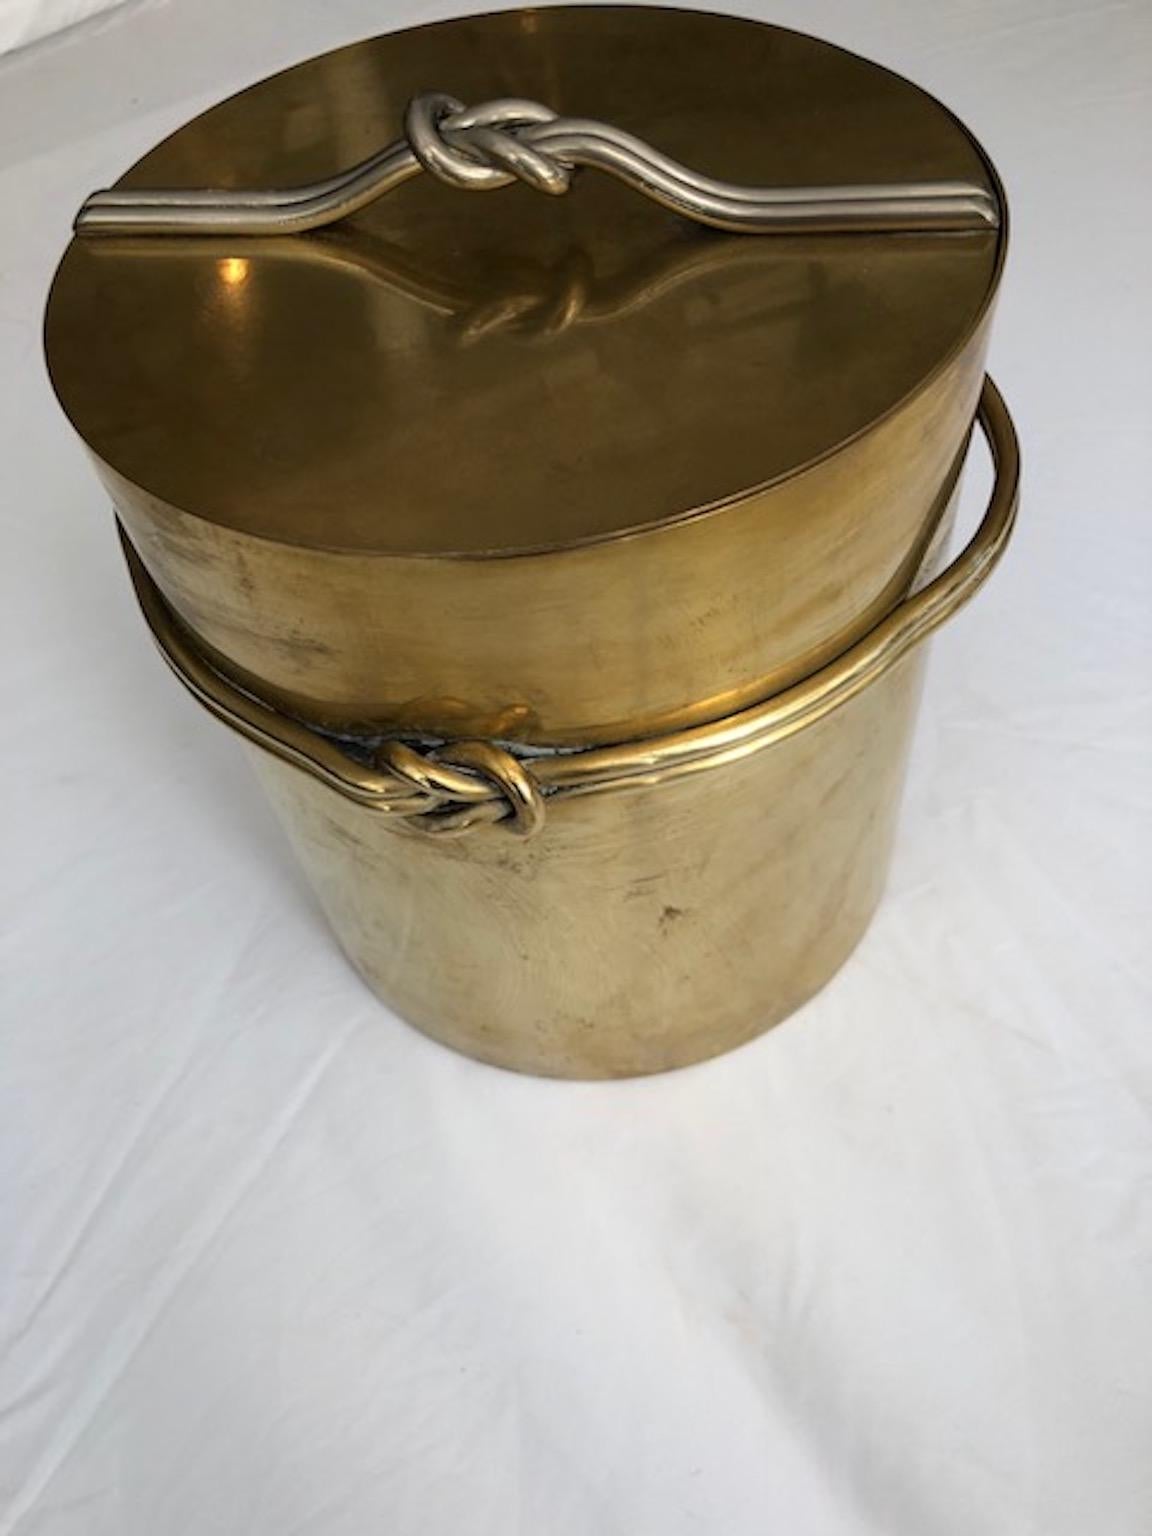 Vintage ice bucket with a twisted rope design on the lid and around a container, made of brass, and inside fine polished steel, Italian, 1970s.